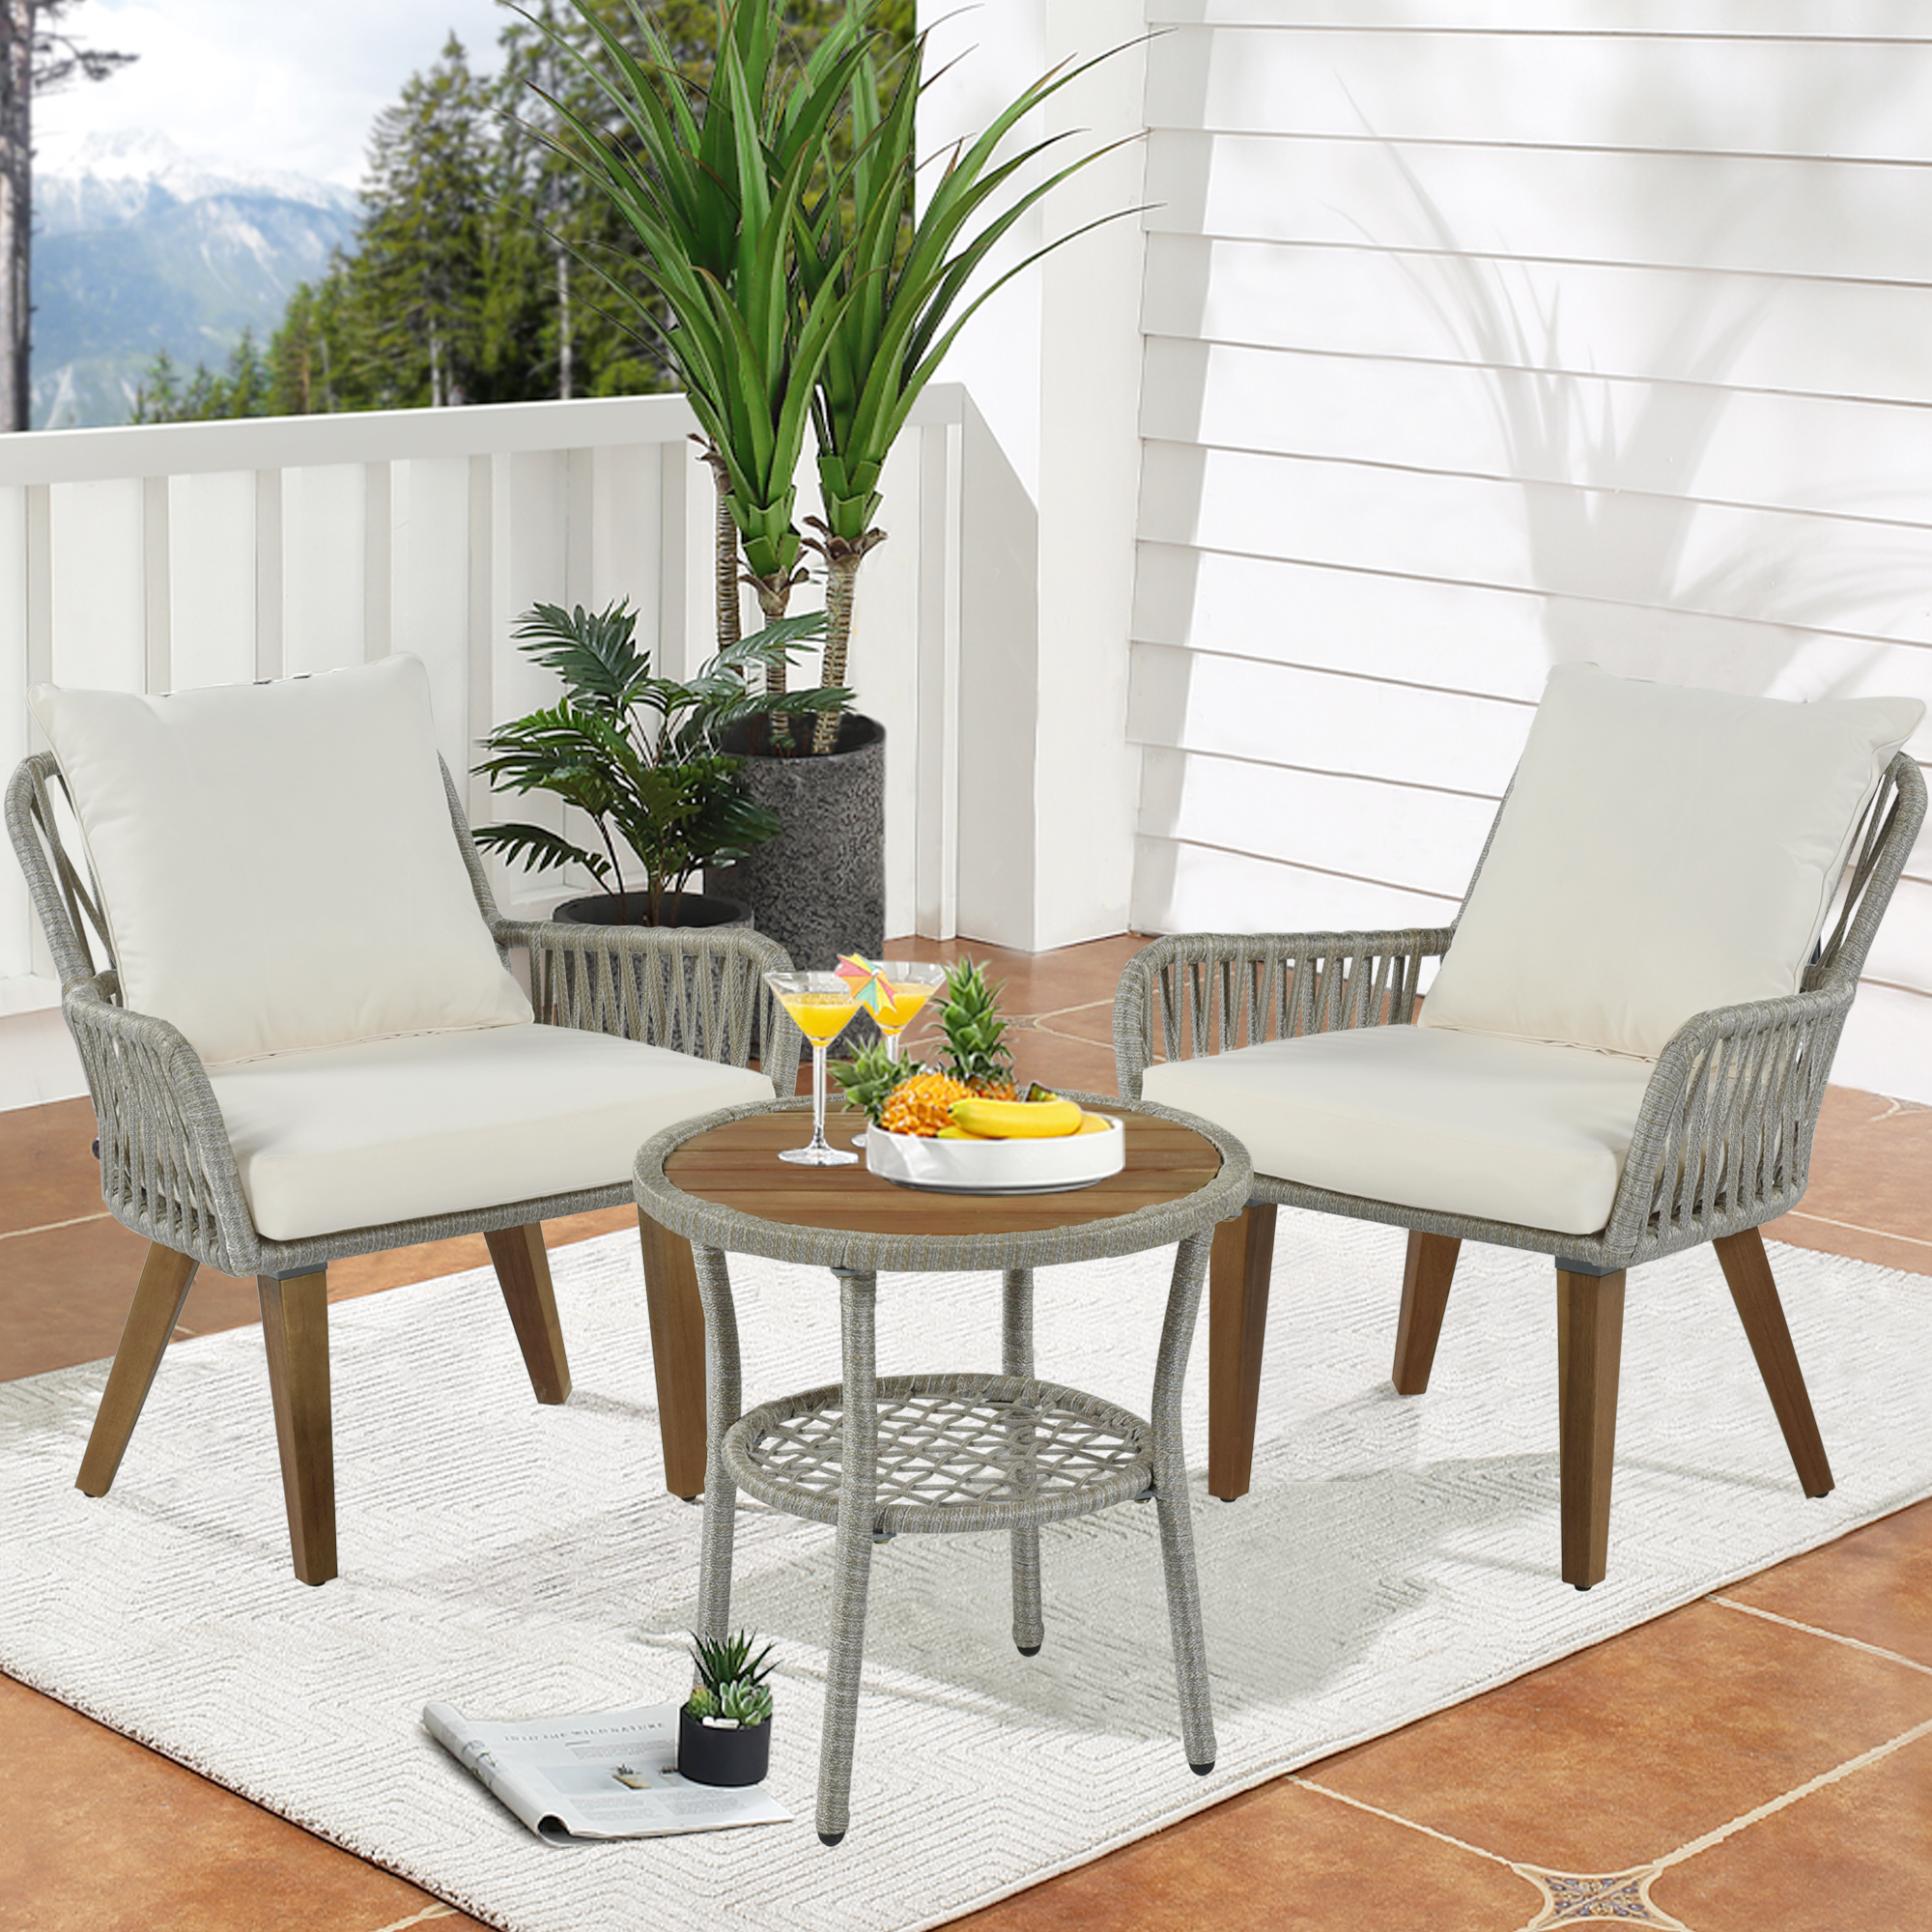 Patio 3-Piece Bistro Set Woven-Rope Conversation Set with Wood Tabletop and Cushions for Balcony, Gray Rope+Beige Fabric-Boyel Living